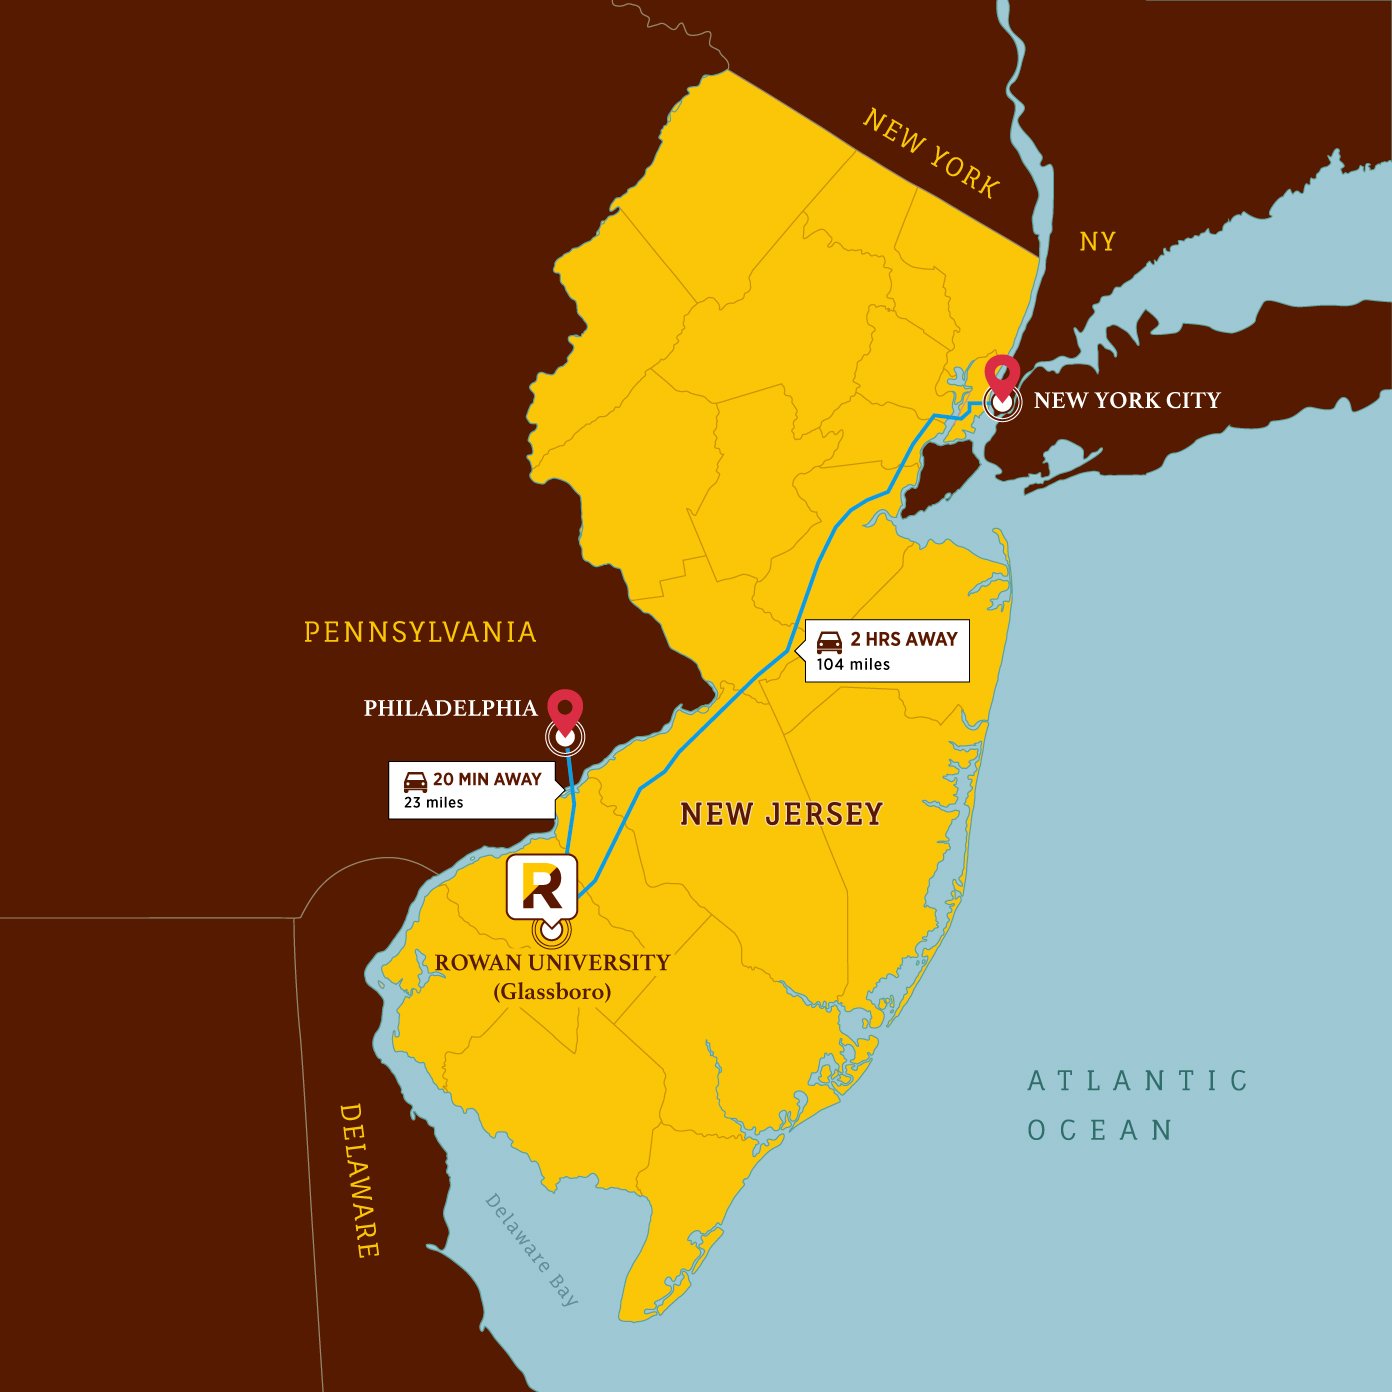 An map of the state of New Jersey with an indication as to where Rowan University is located in Glassboro.